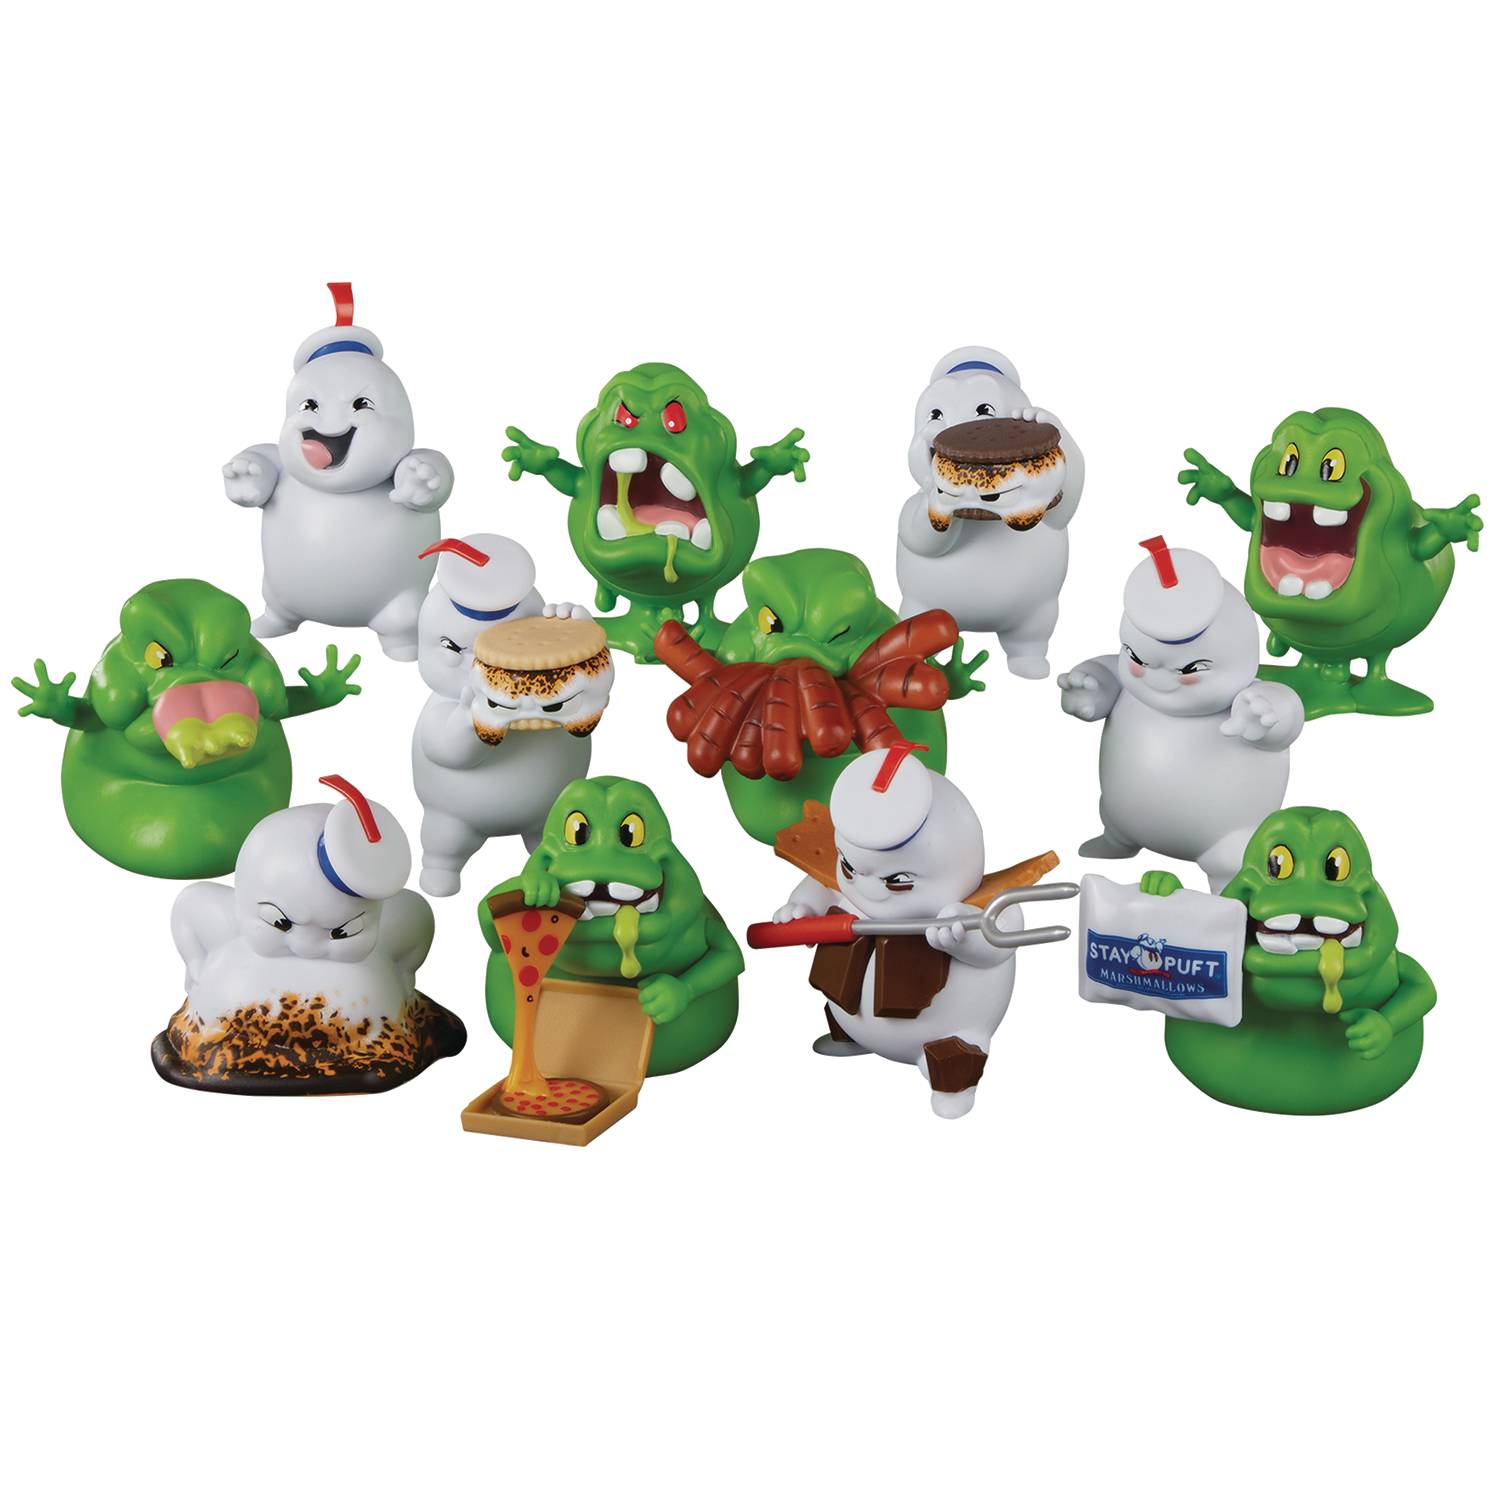 GHOSTBUSTERS ECTO COLL S1 BMB MINIFIG DIS